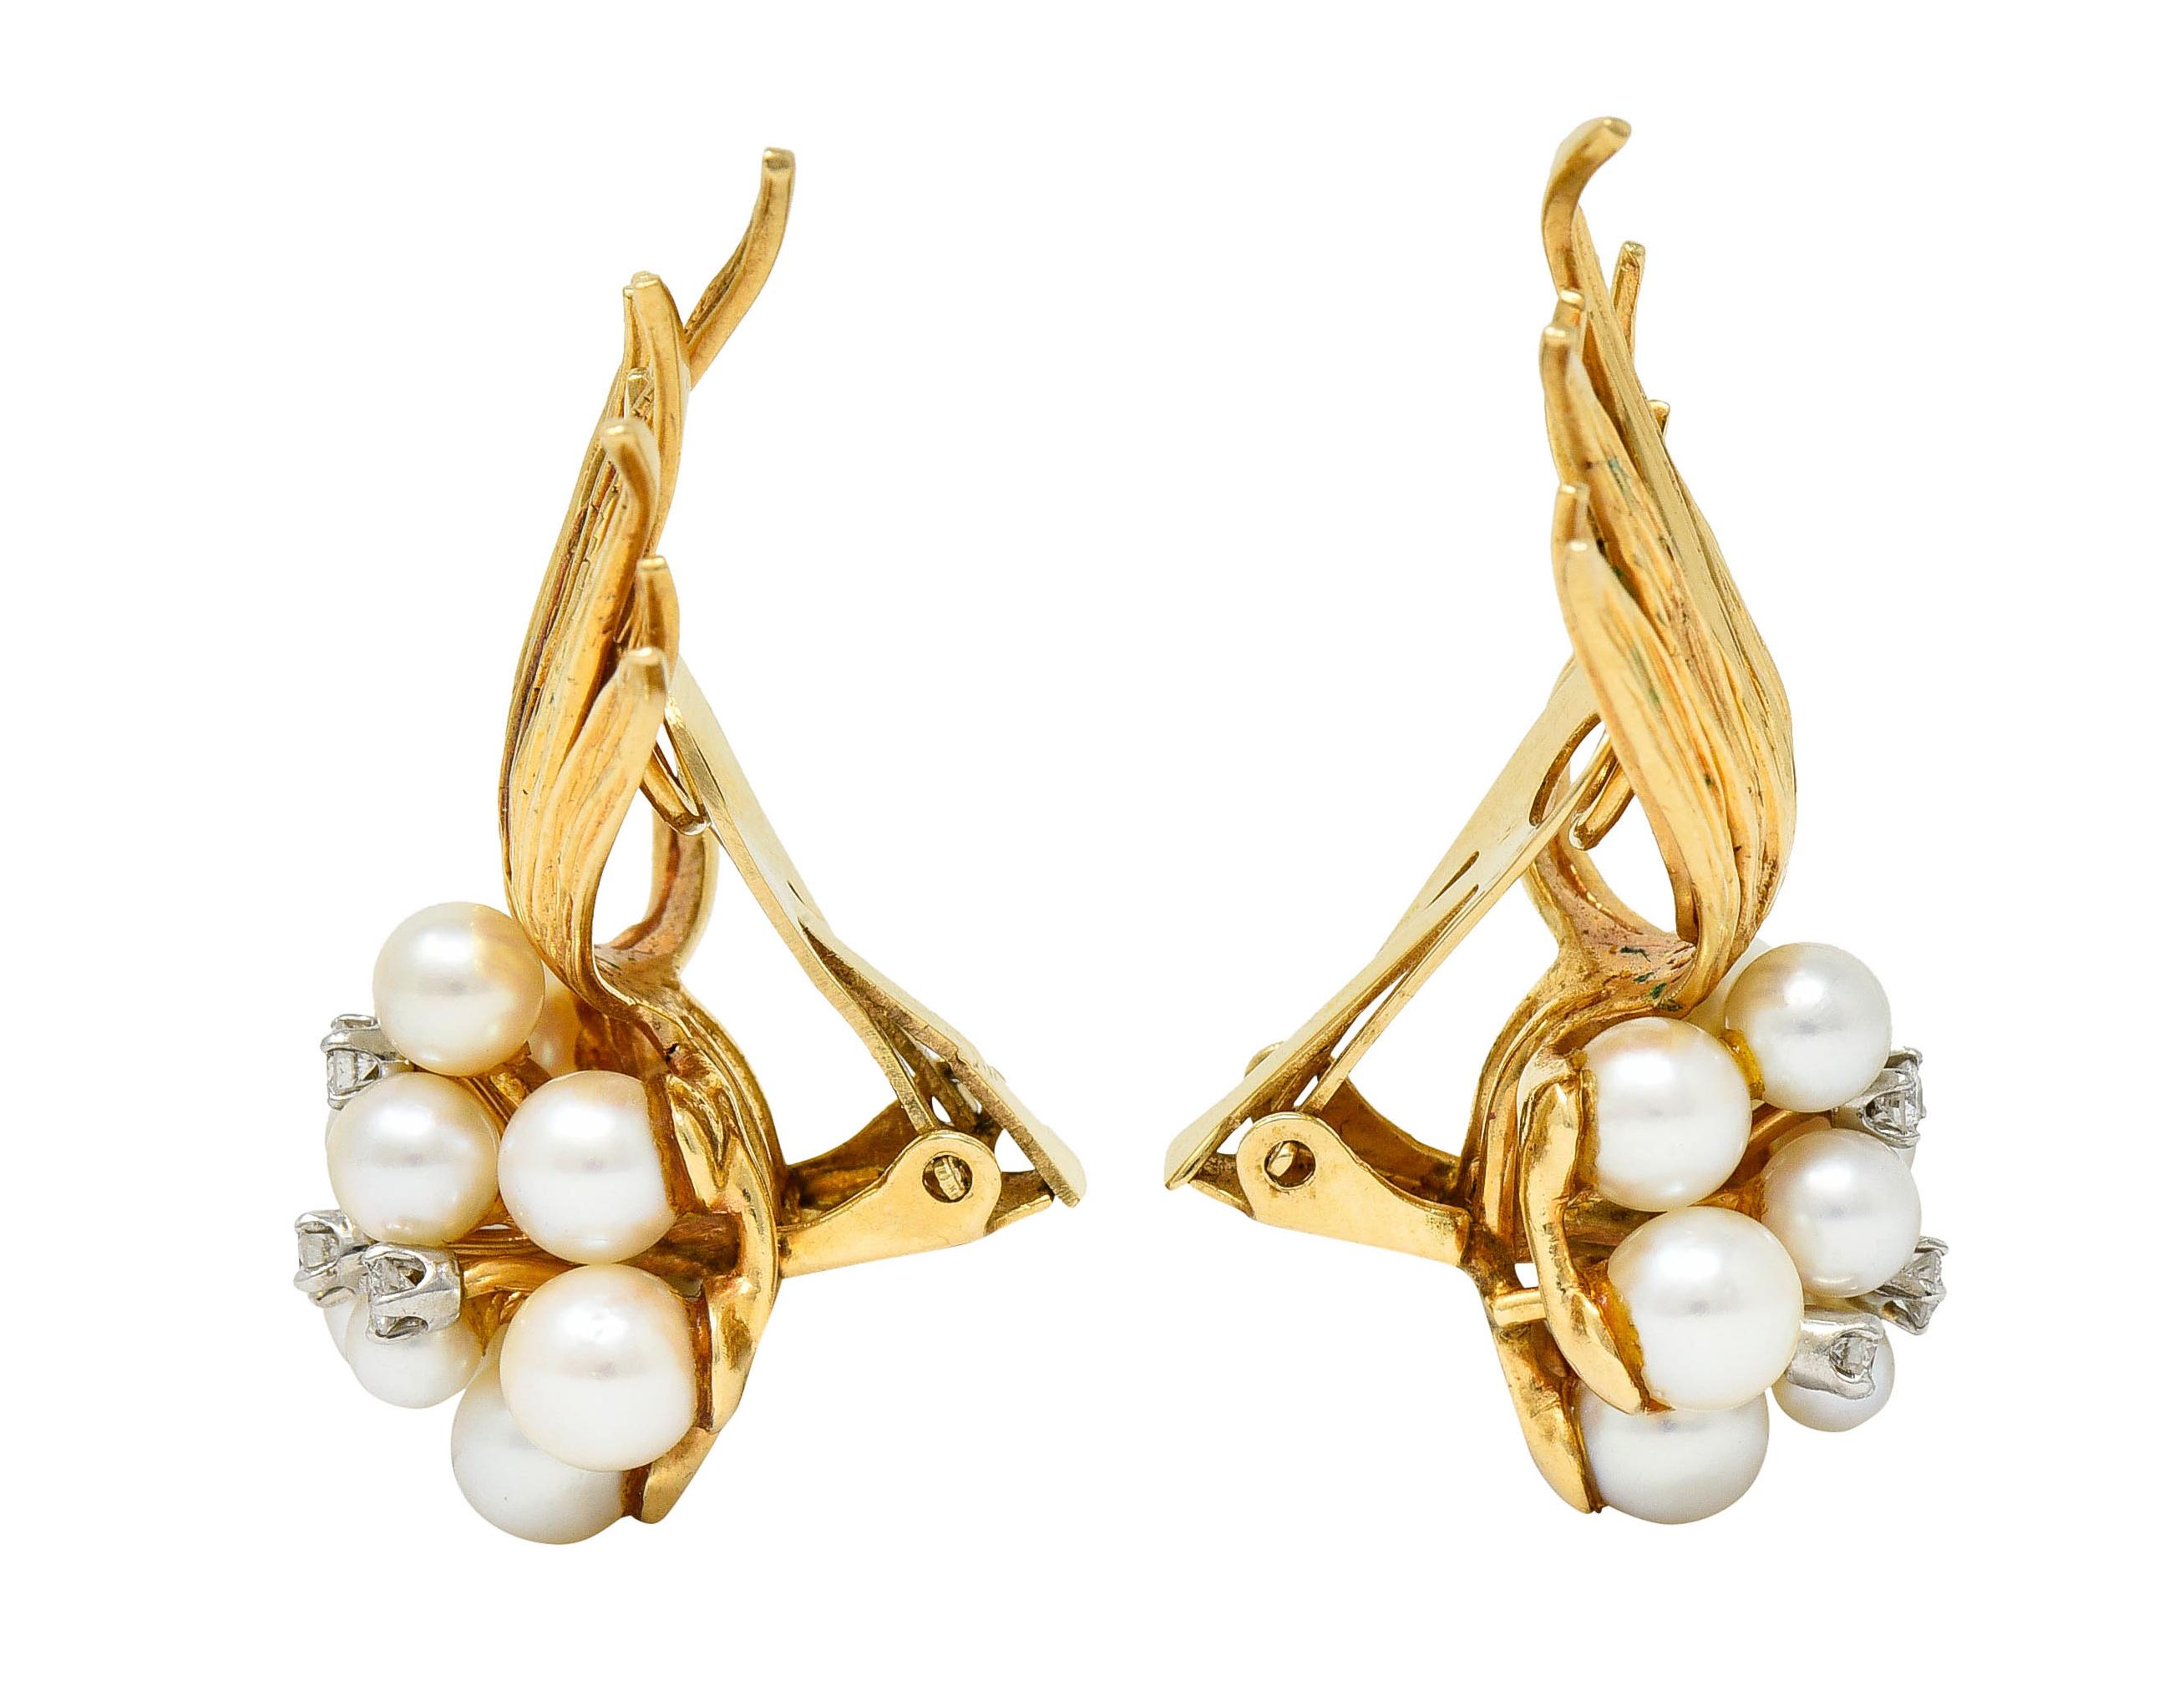 Ear-clips are designed as pearl clusters paired with scrolling texturous gold tendrils

Pearls are very well matched - cream in body color with strong rosè overtones

Measuring from 5.0 mm to 3.0 mm with very good to excellent luster

Accented by